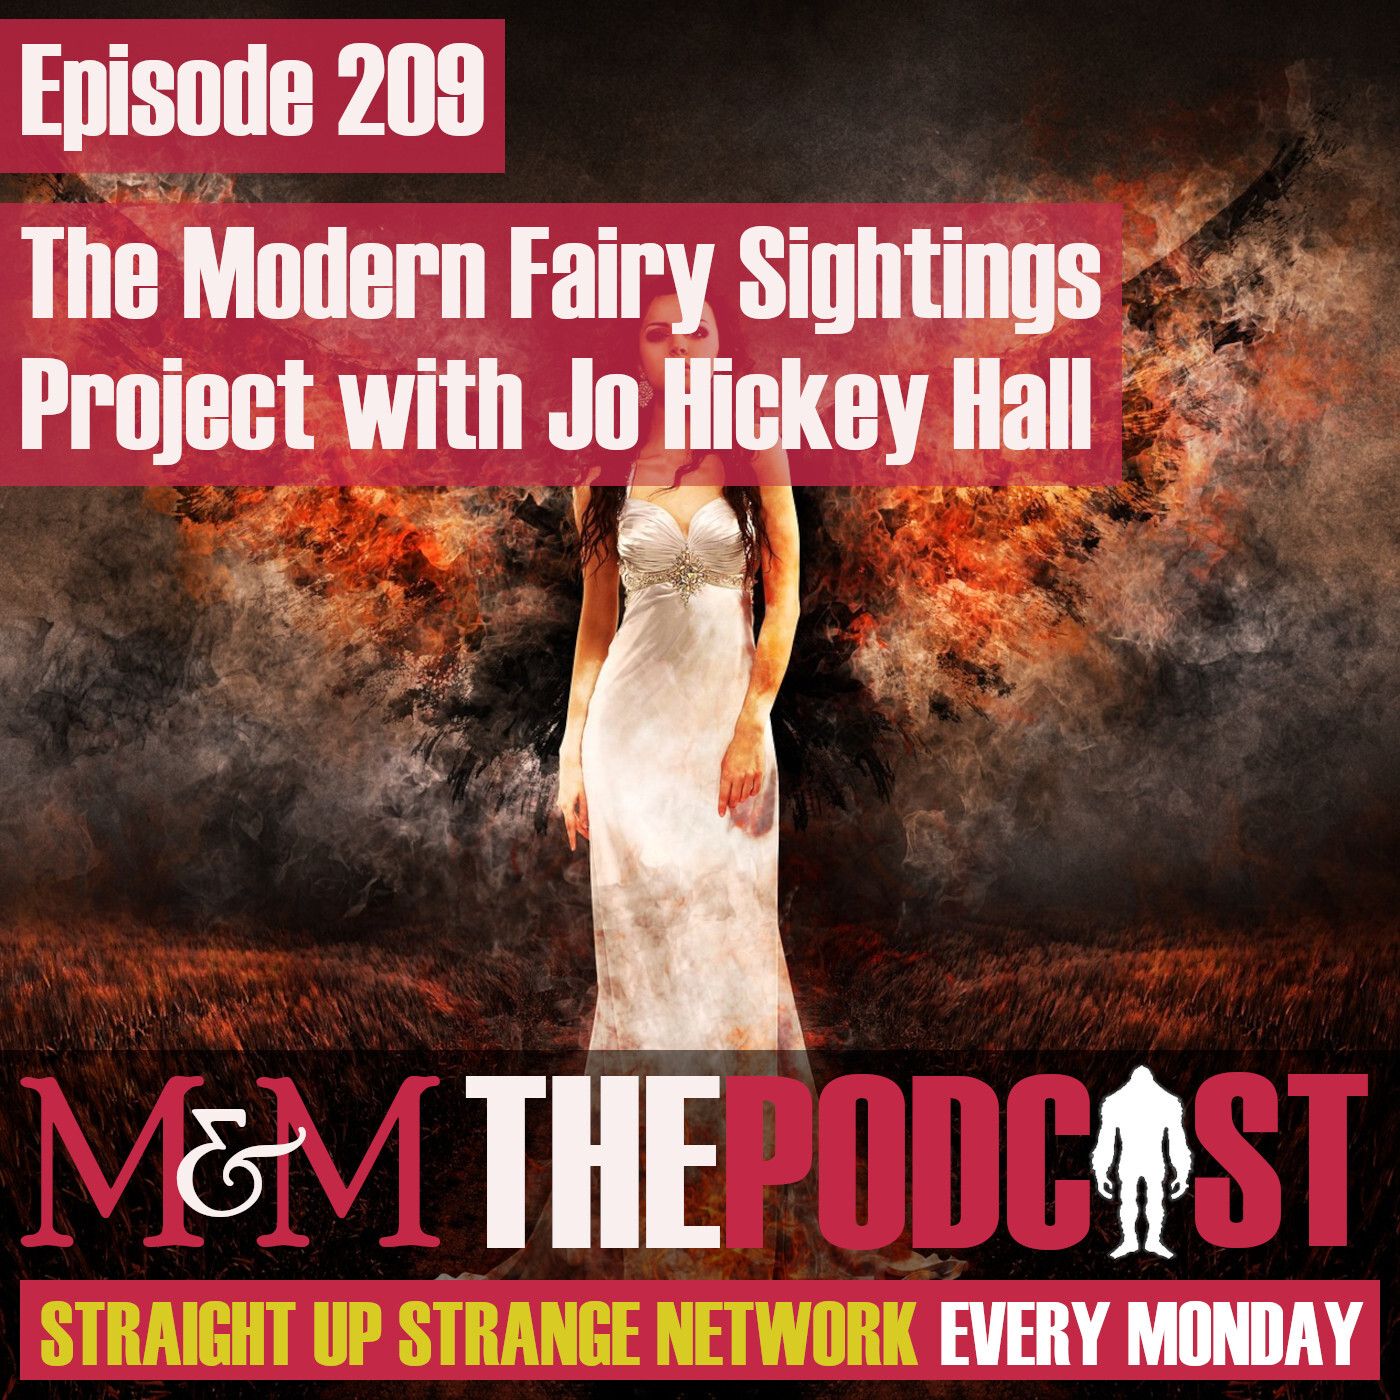 Mysteries and Monsters: Episode 209 The Modern Fairy Sightings Project with Jo Hickey-Hall